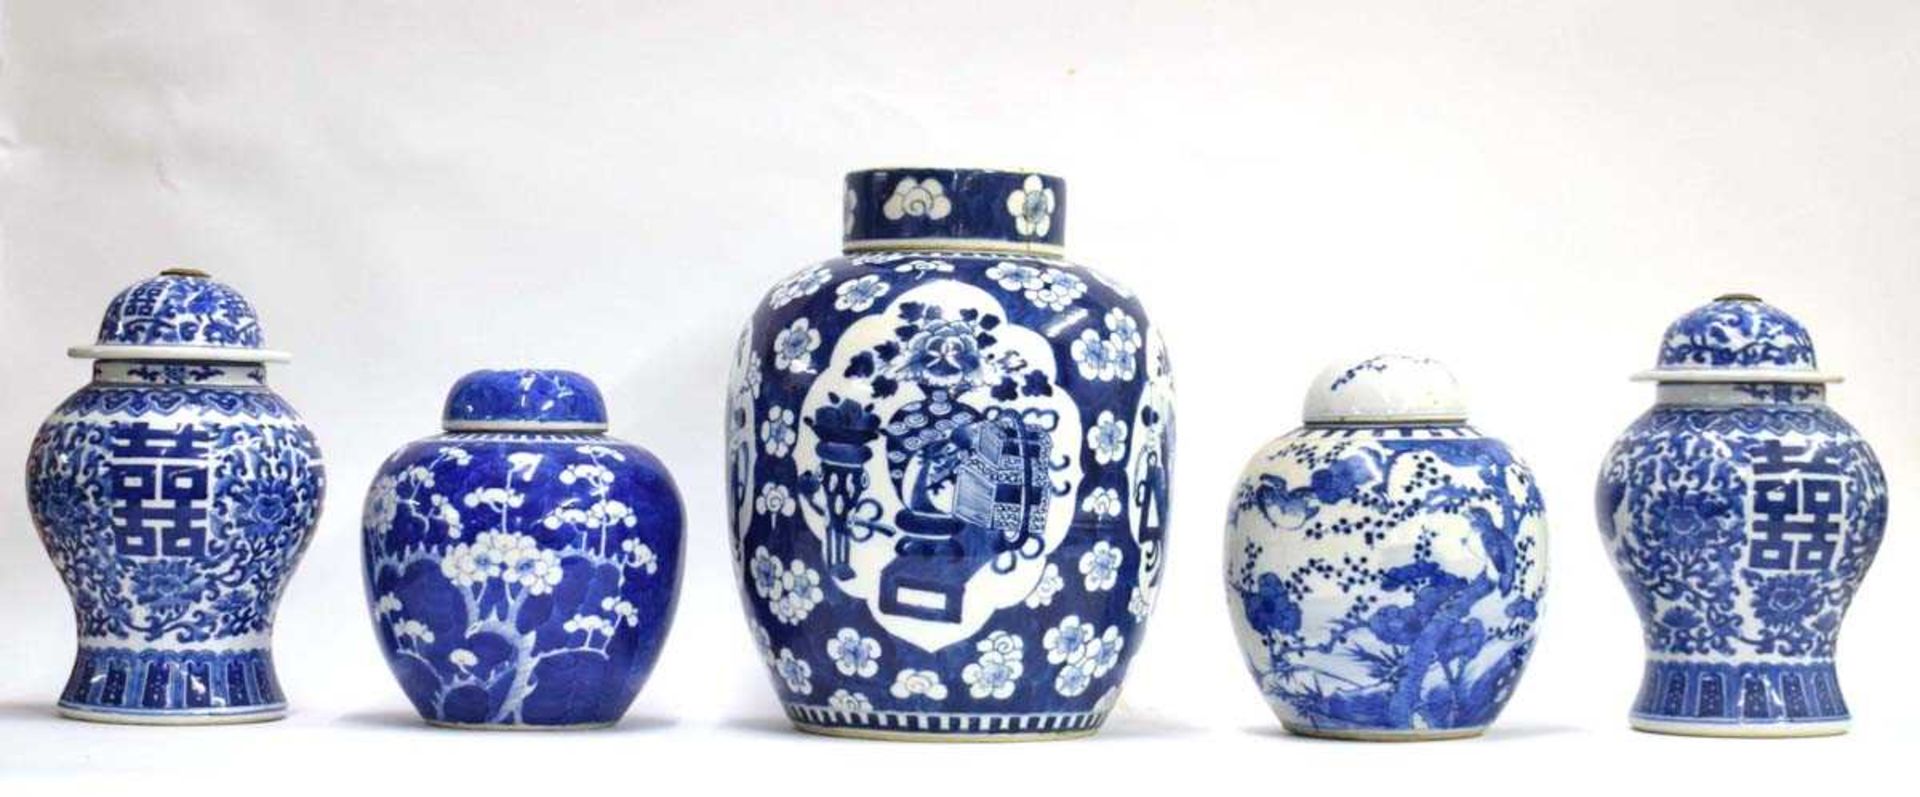 Thirteen Chinese ginger jars of typical form including a provincial example, h. 15 cm, blue and - Image 2 of 23